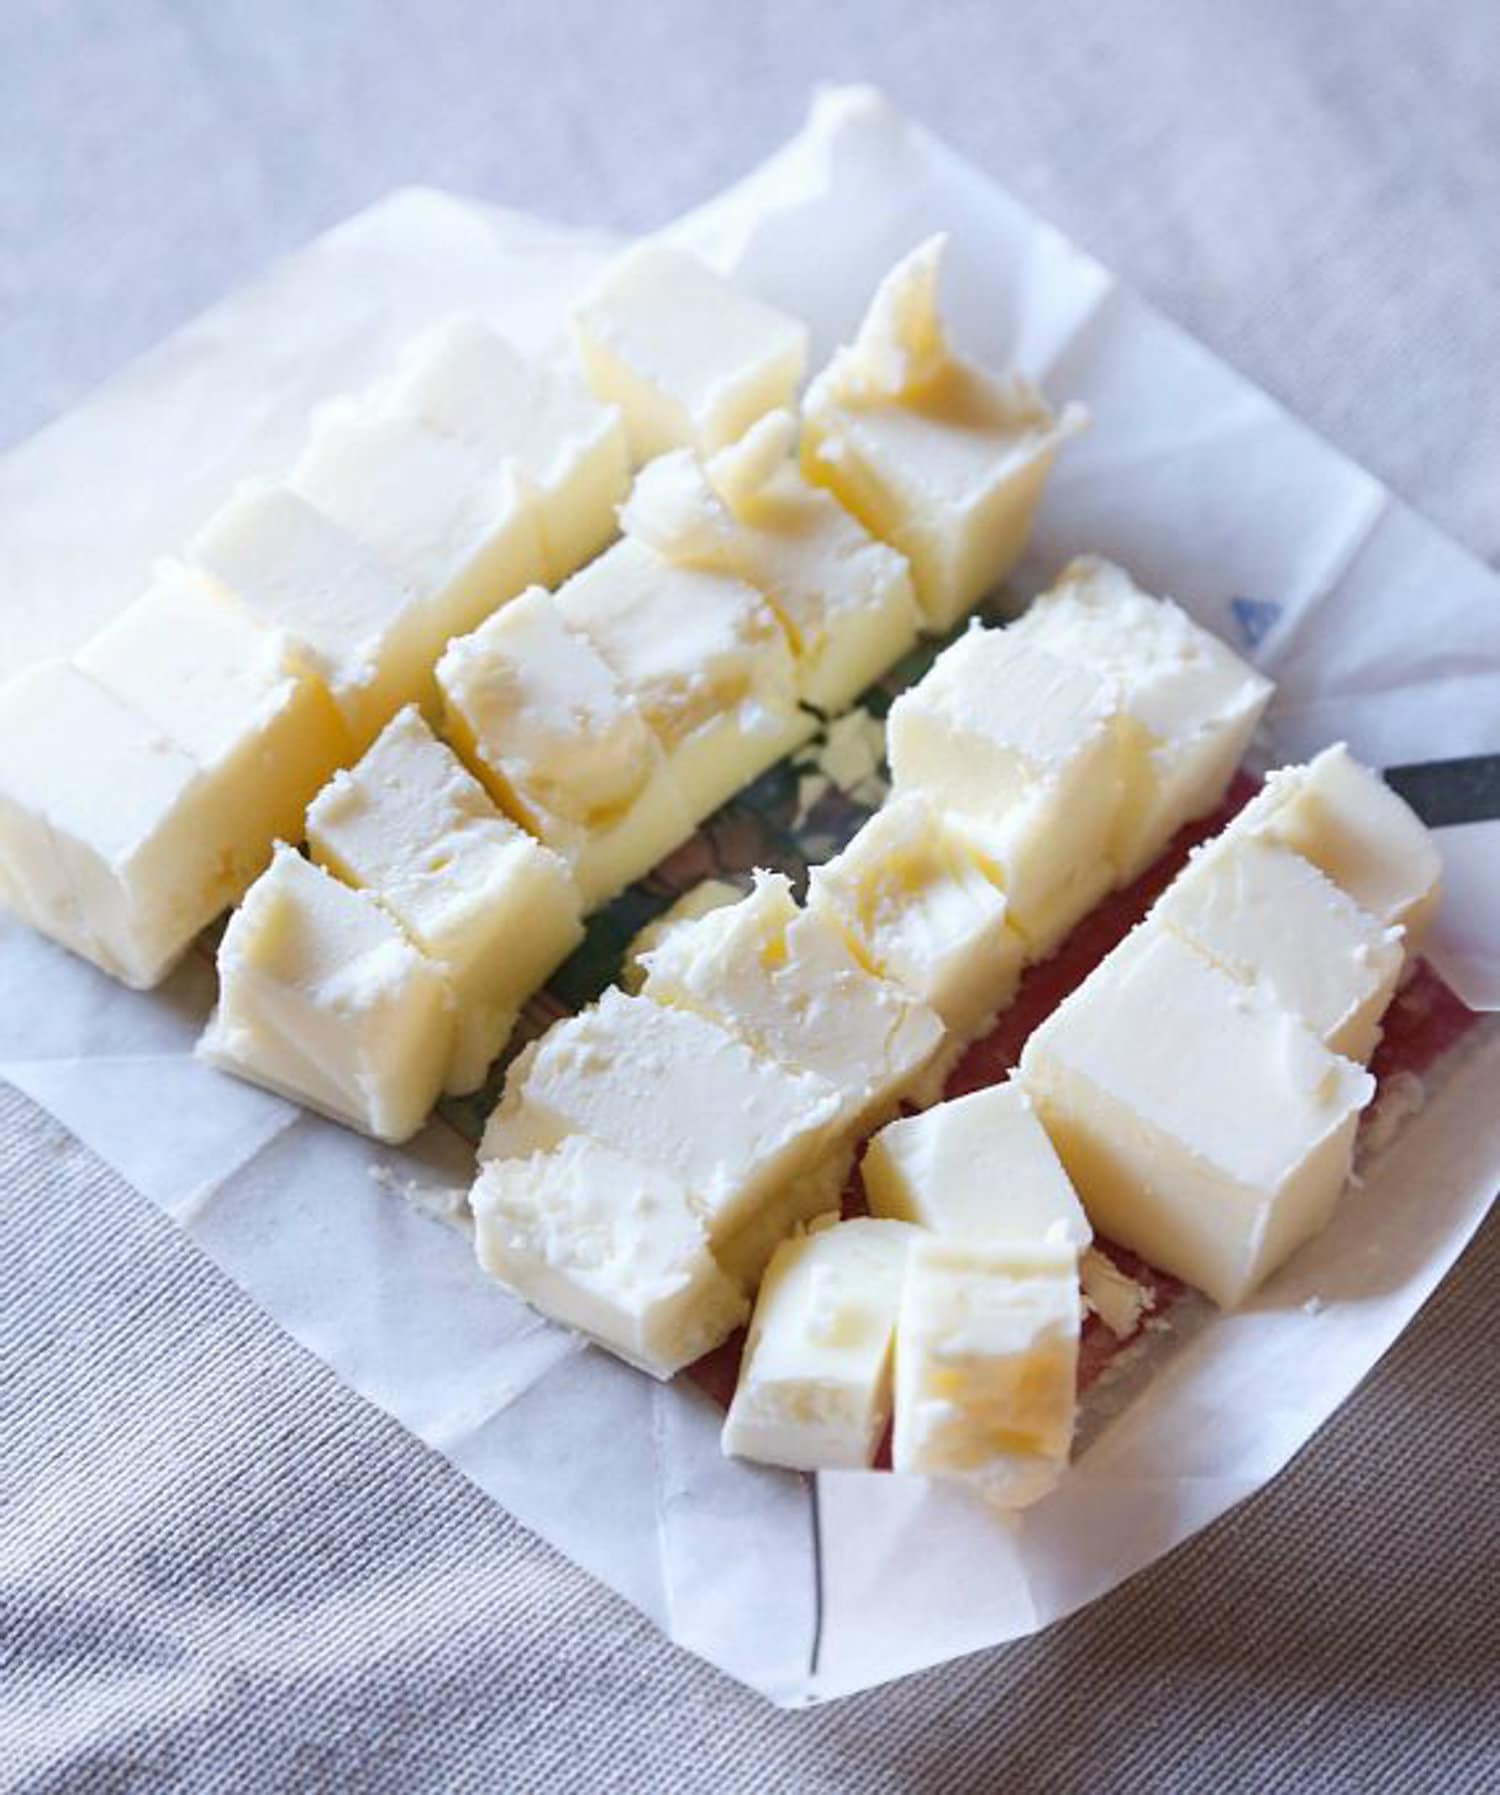 Butter diced into small blocks